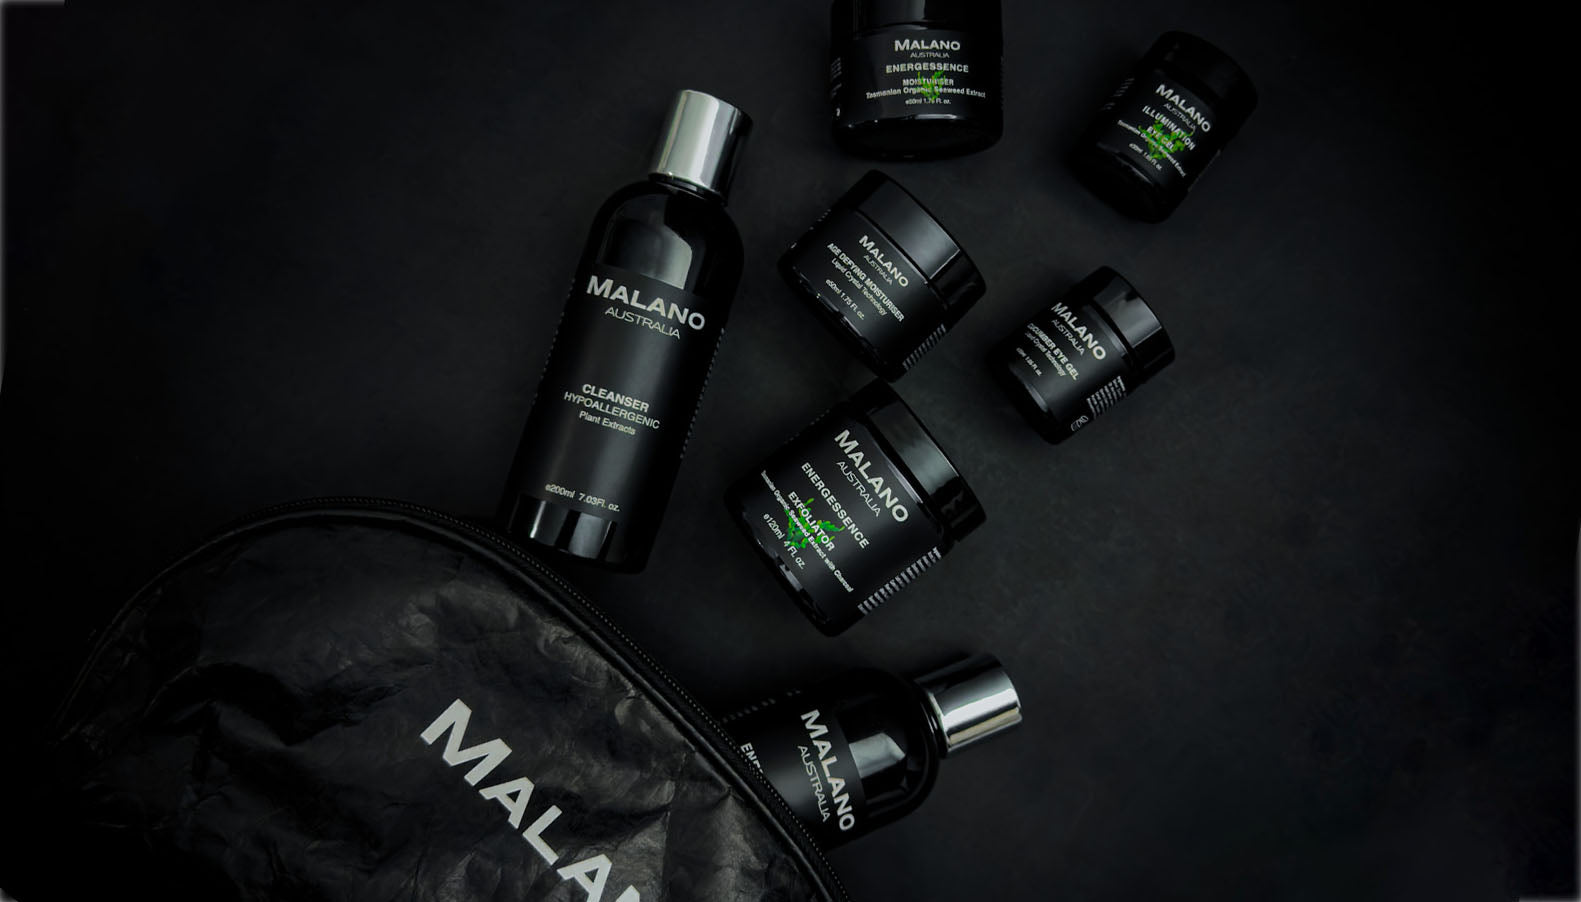 Various Malano organic skincare products including eye gel, cleanser, moisturiser and exfoliator, lightly lit, spilling out of a cosmetic bag and scattered across a black background